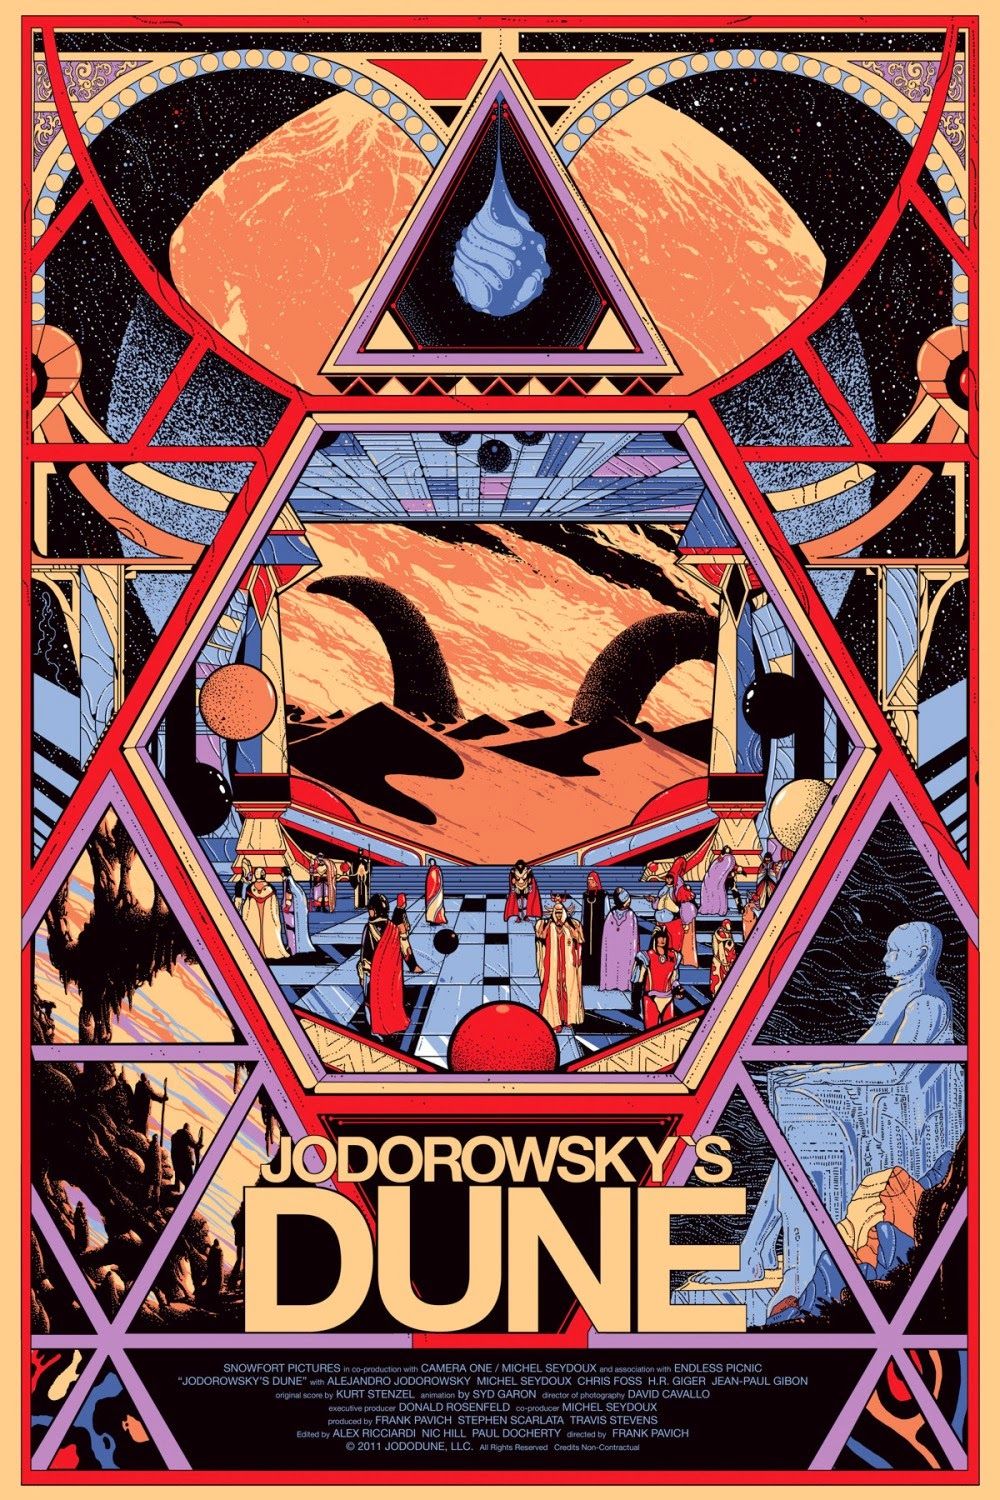 A poster for Jodorowsky's Dune